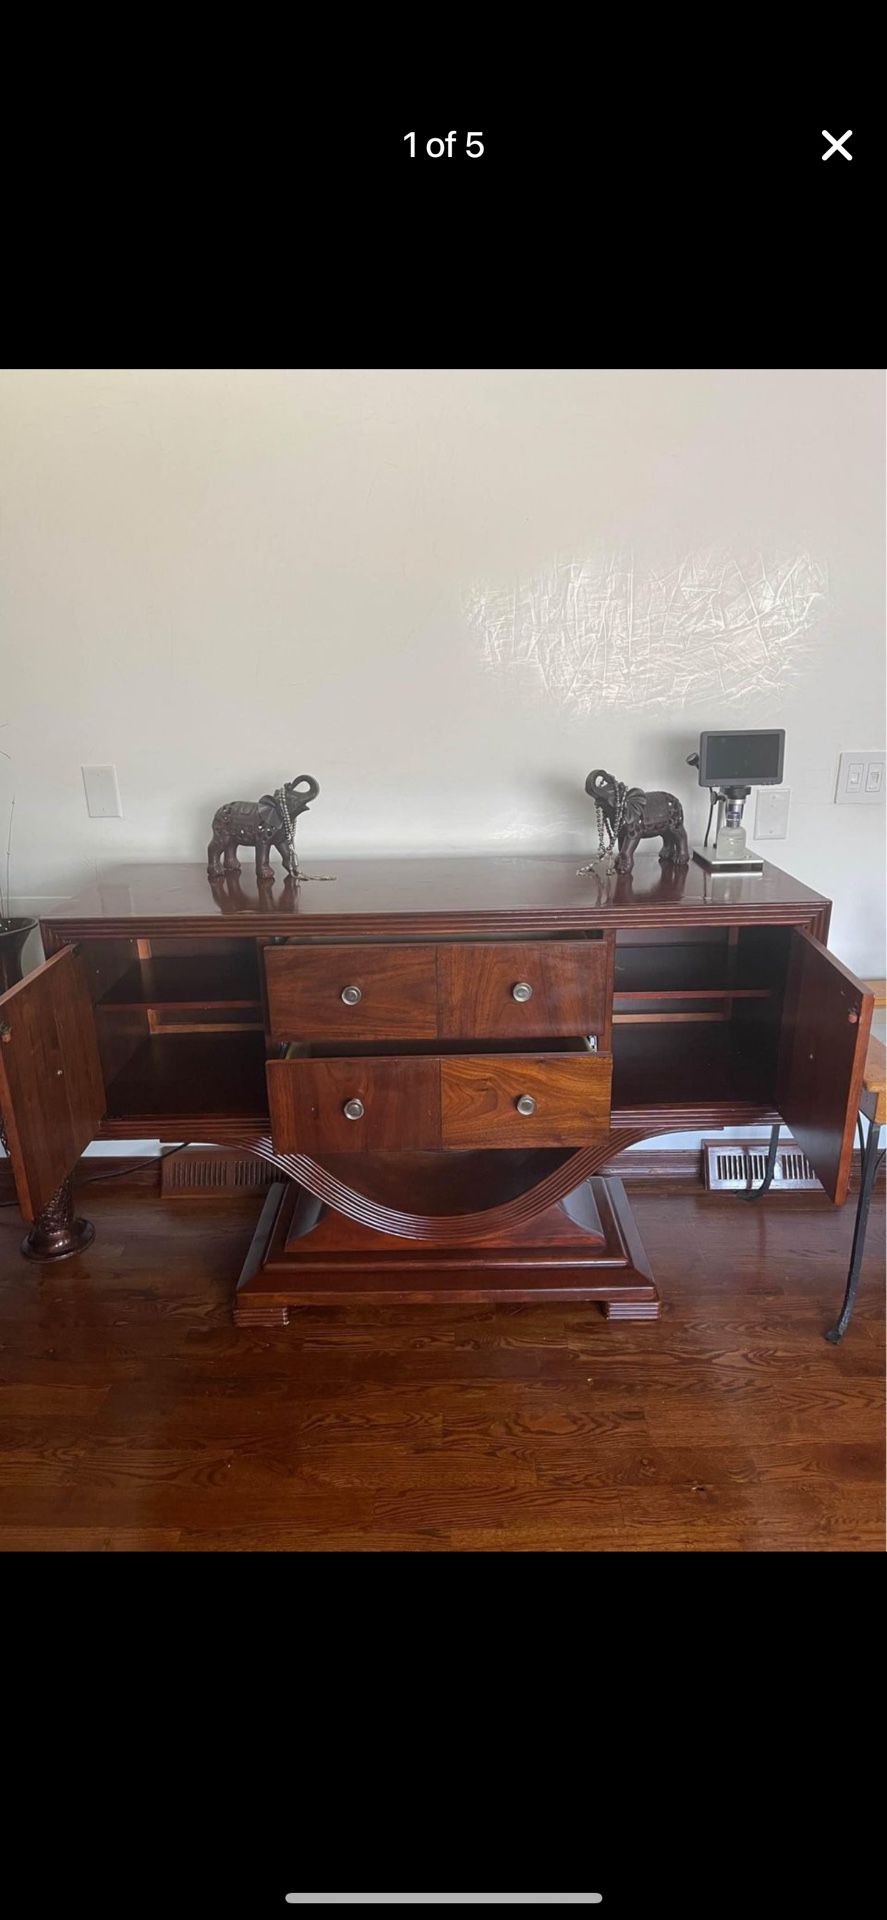 Real Wood Beautiful Console From American Furniture, Got It For $800 3 Years Ago